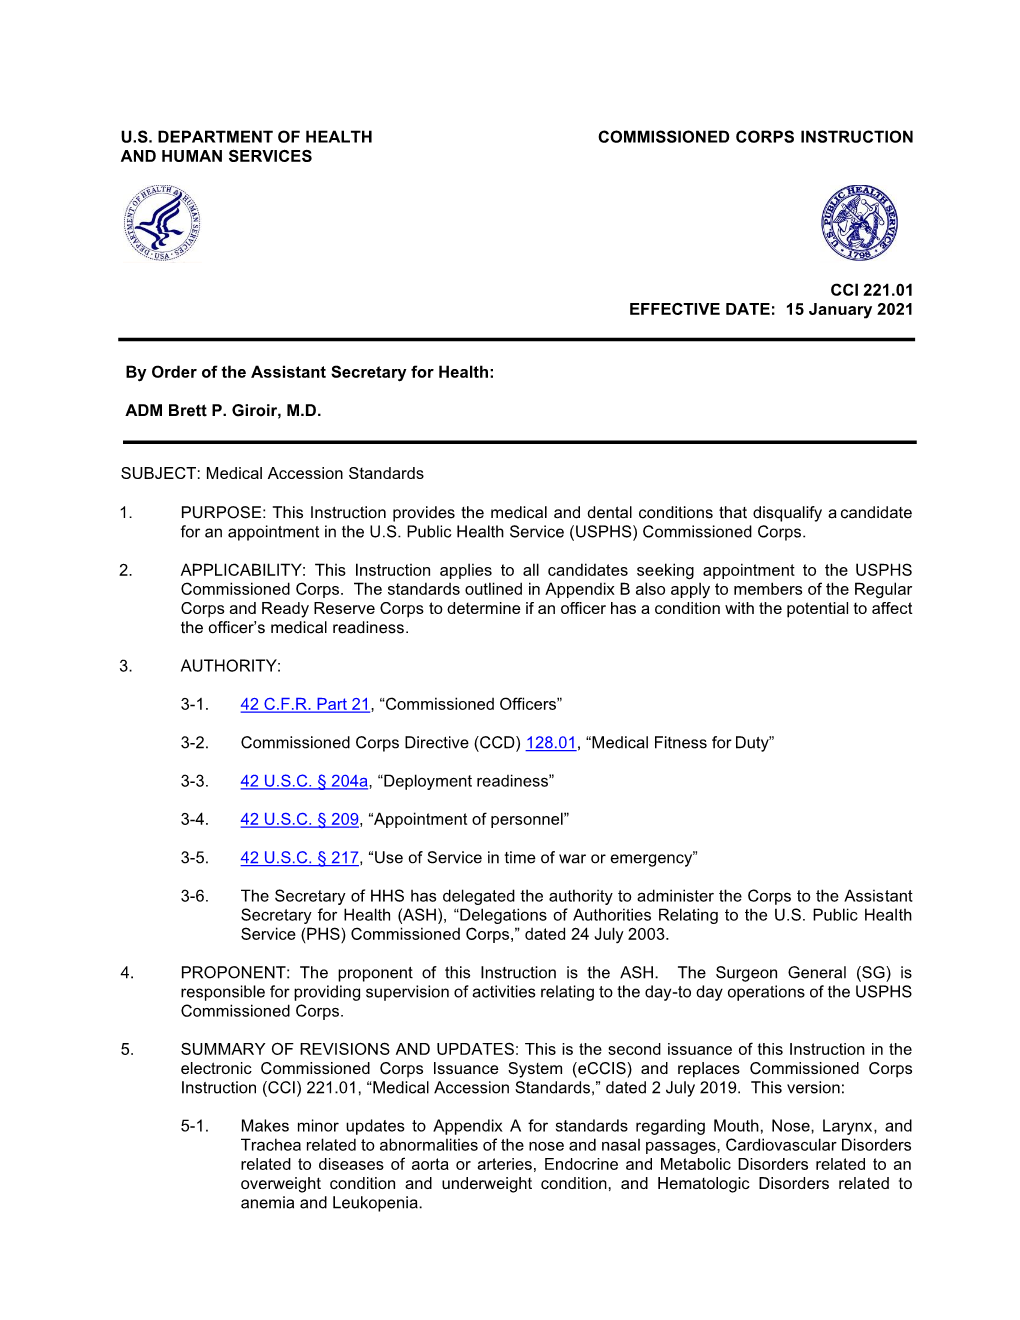 CCI 221.01, “Medical Accession Standards,” Dated 2 July 2019